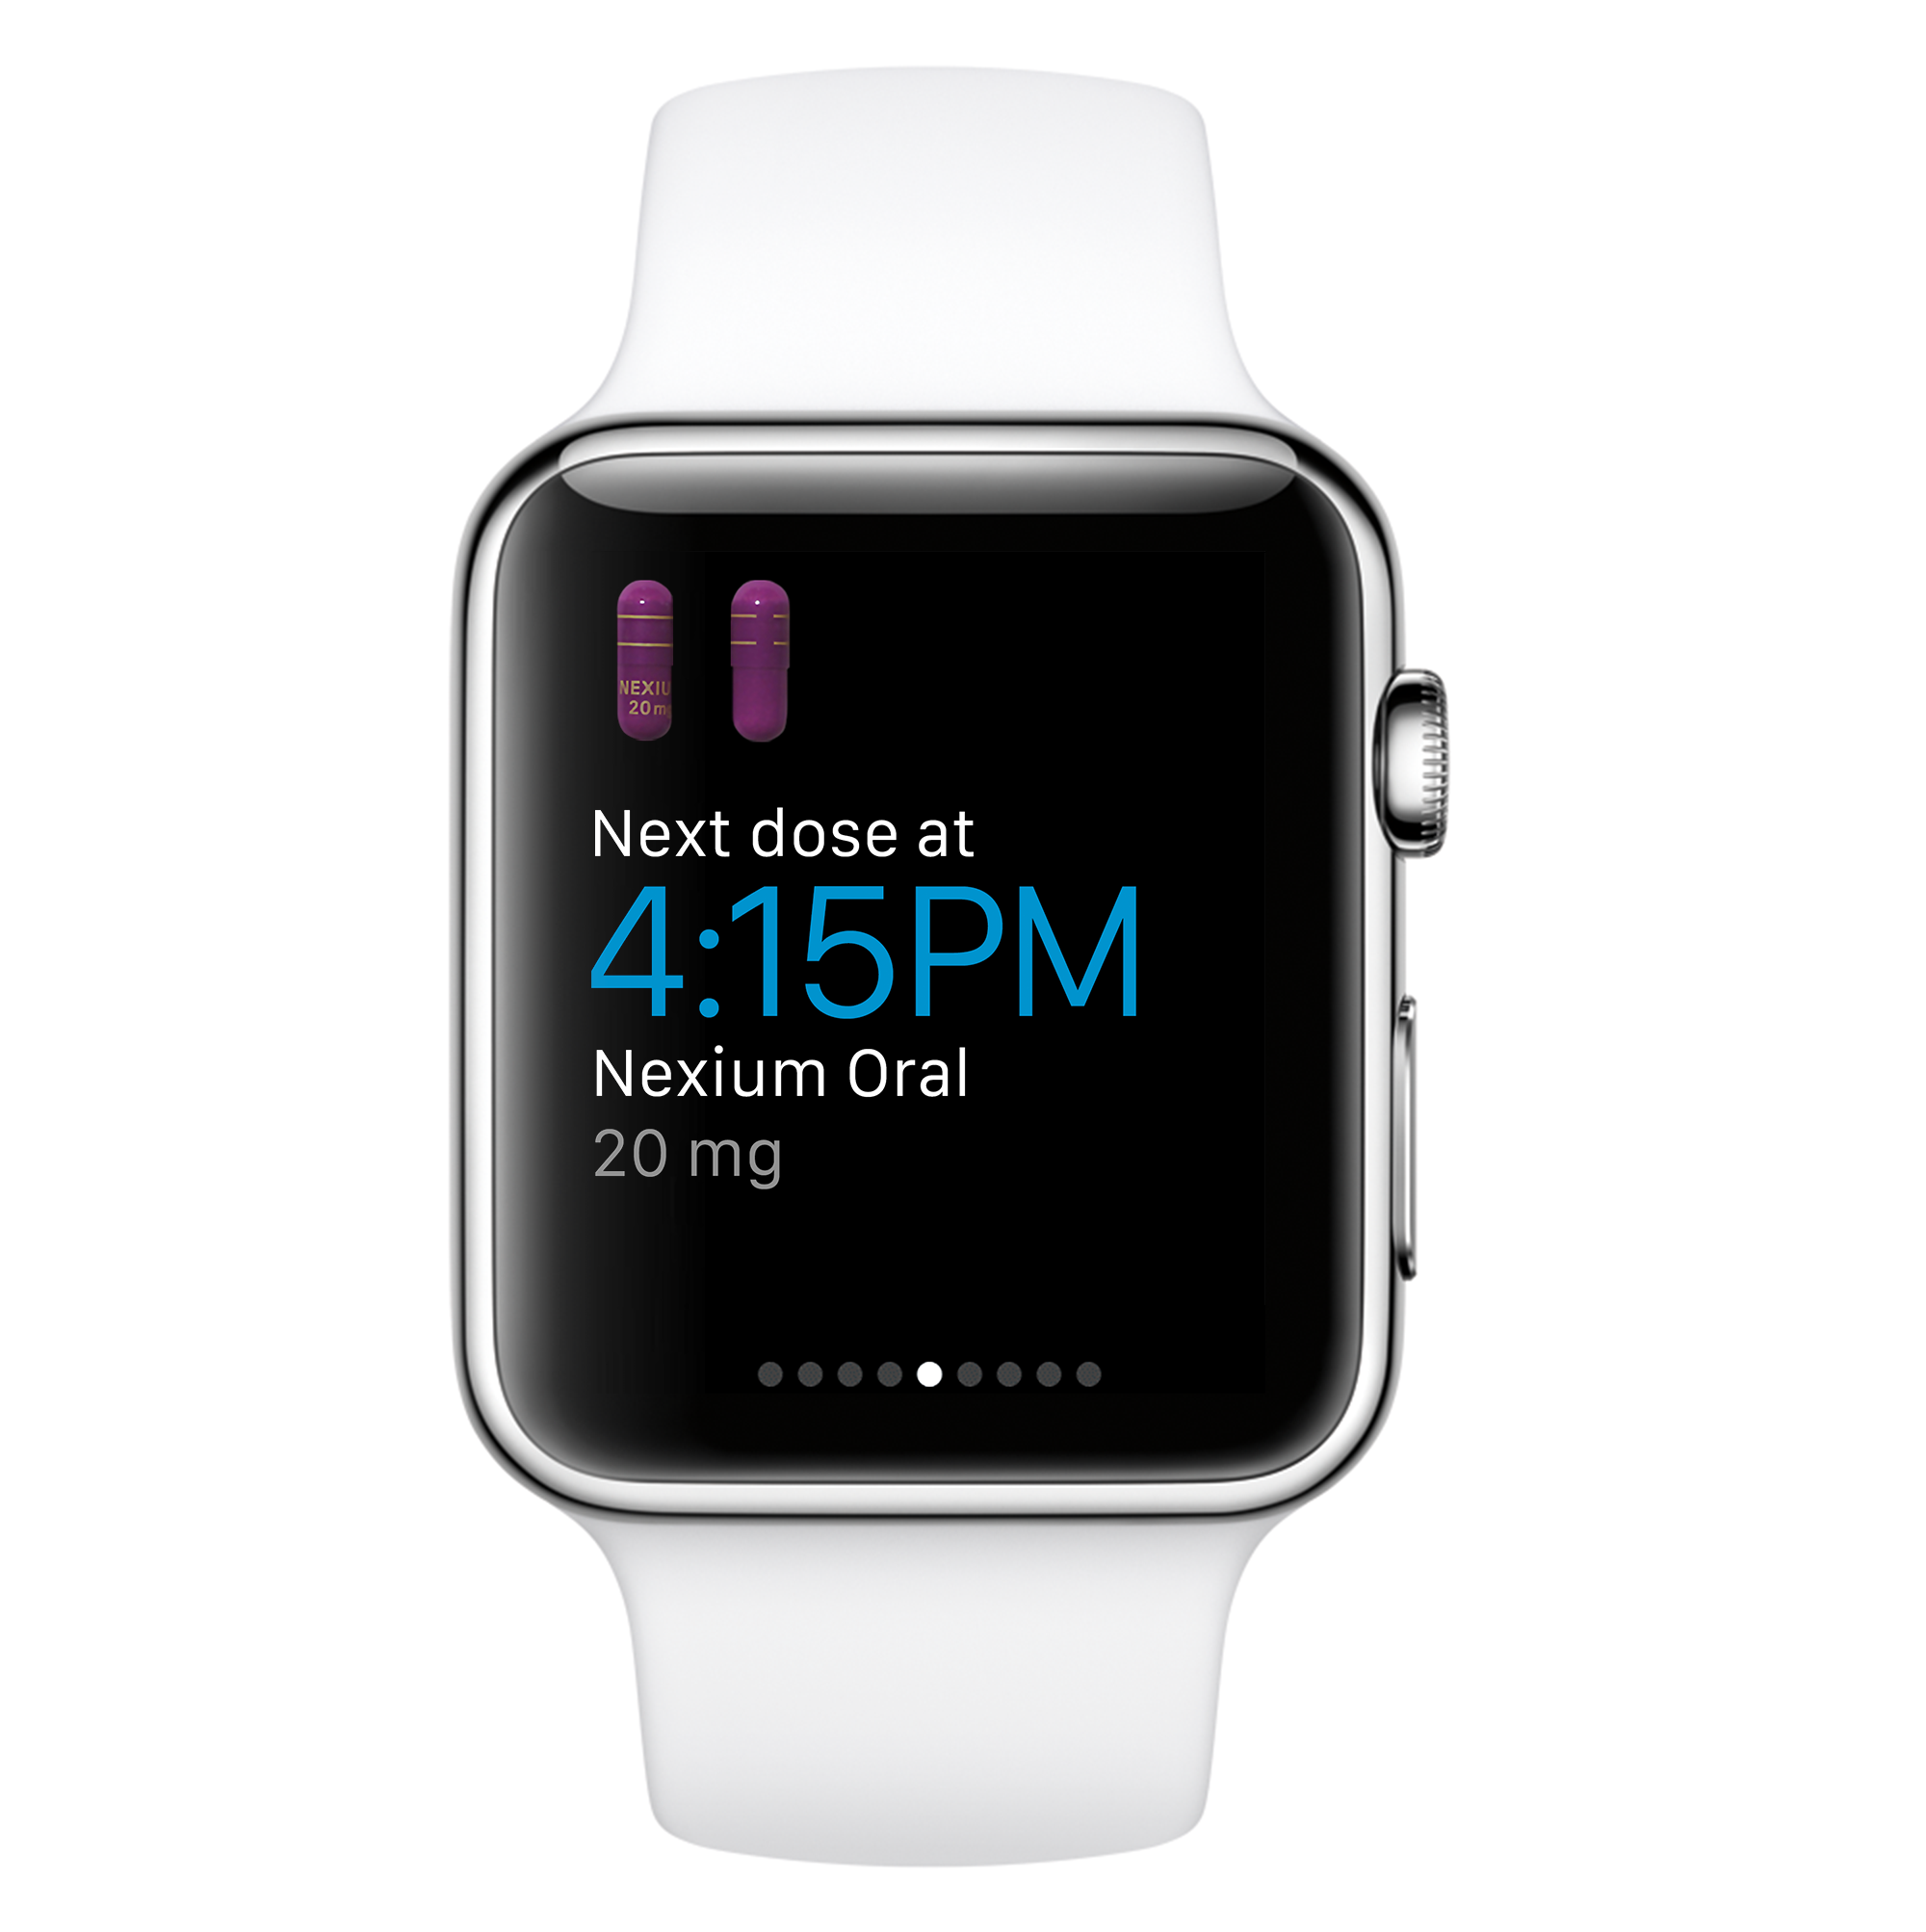 WebMD App Expands with Apple Watch Medication Reminders